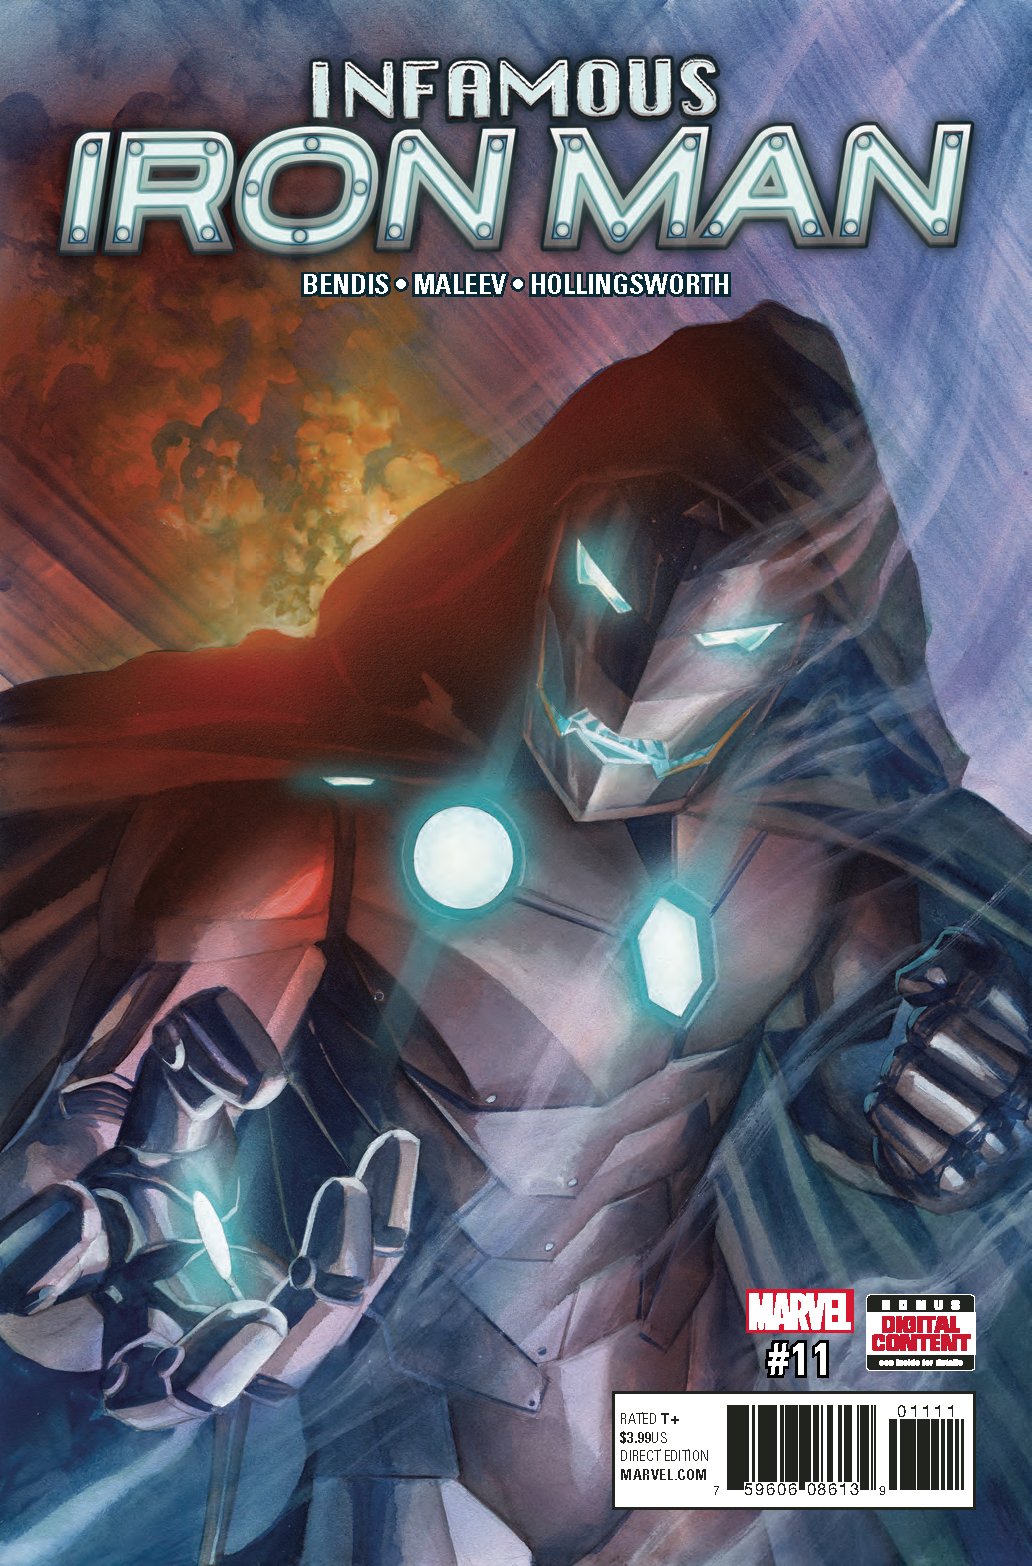 INFAMOUS IRON MAN #11 COVER